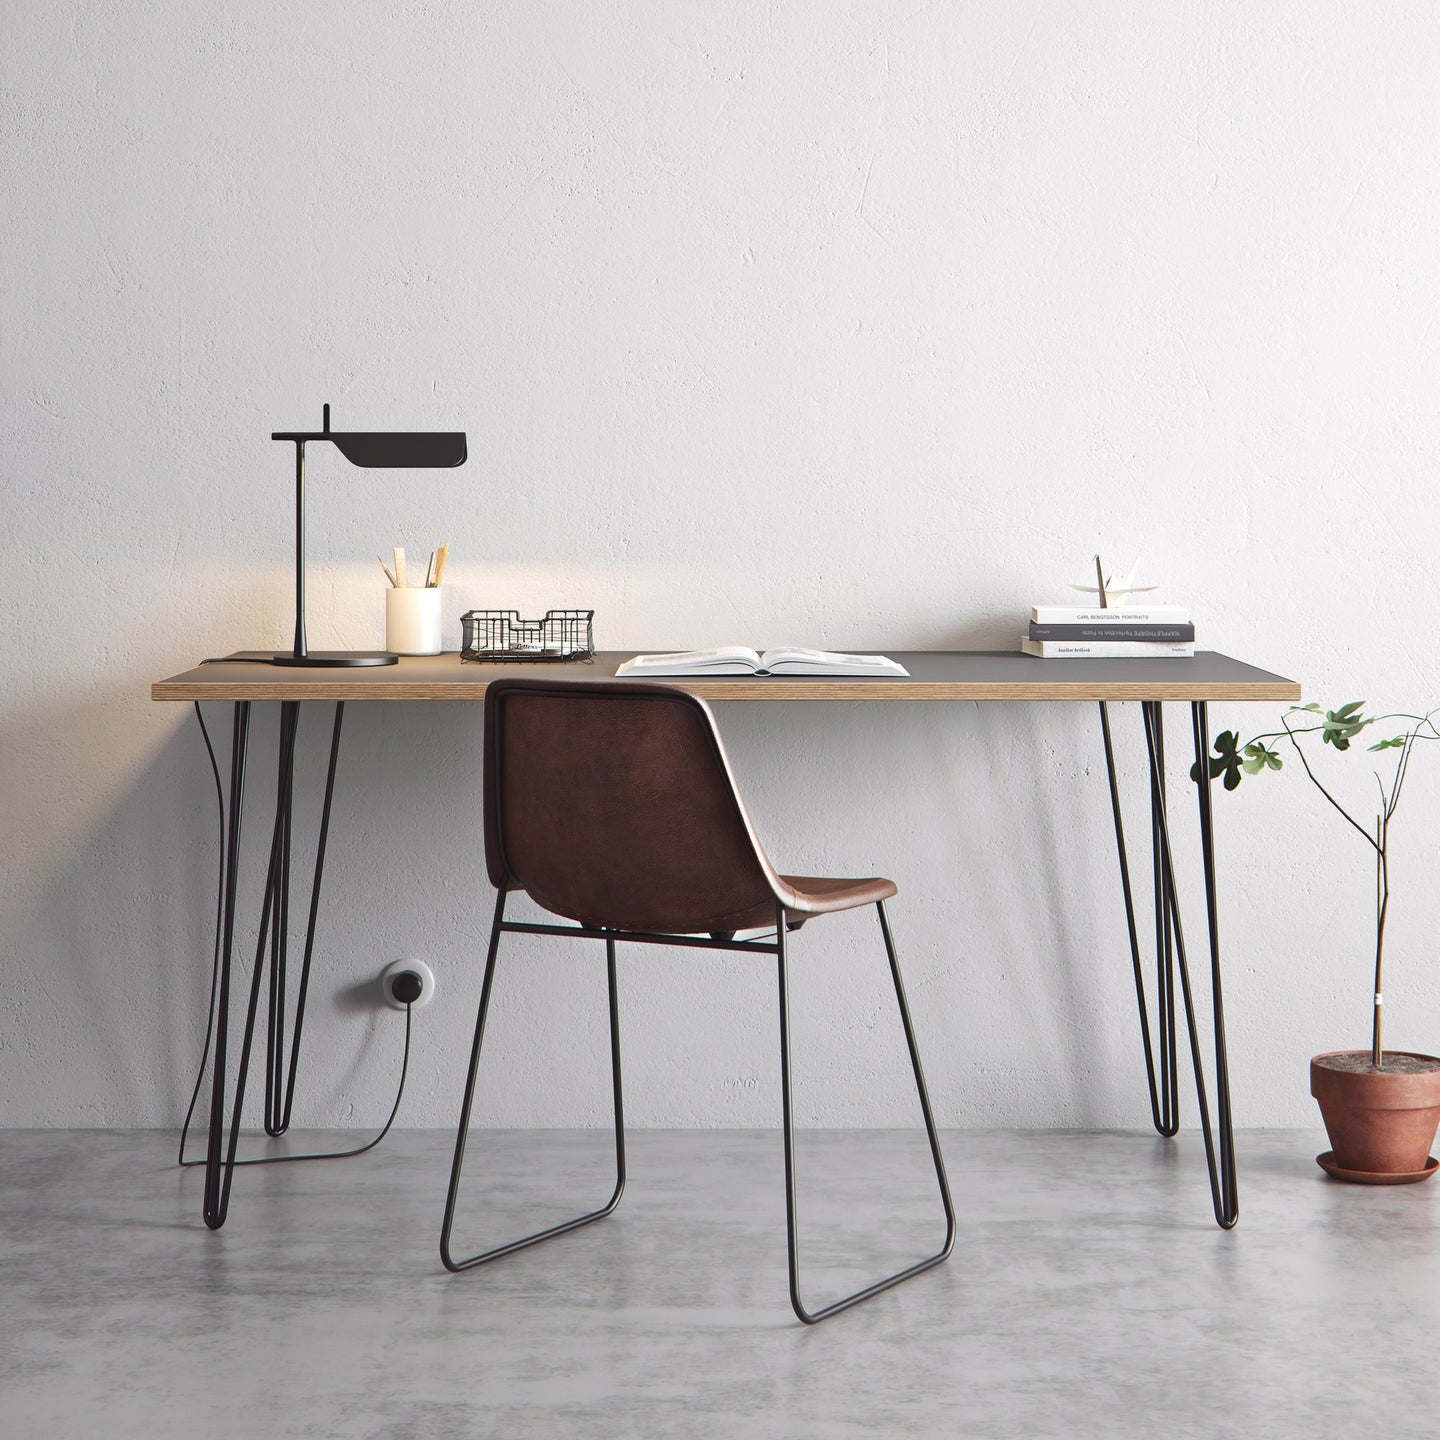 Scandinavian look grey formica coated birch table completed with hairpin legs